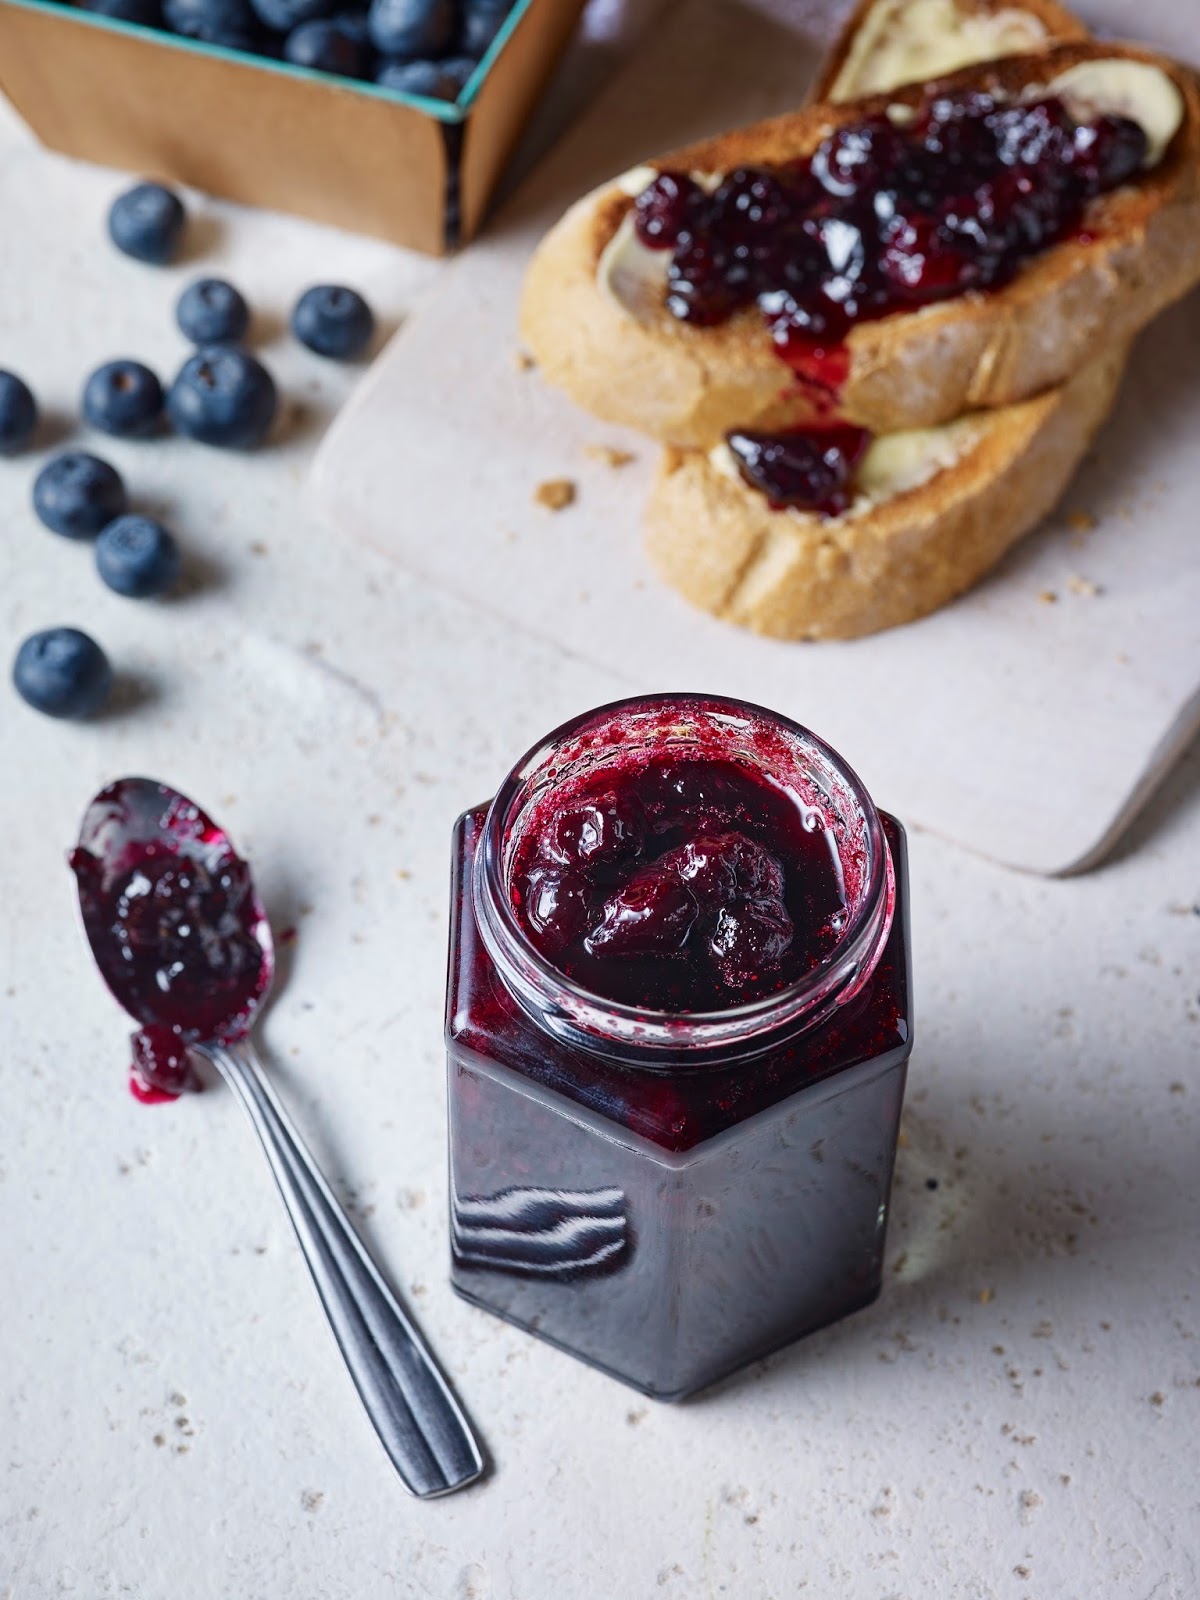 How To Make Earl Grey’s Blueberry Jam